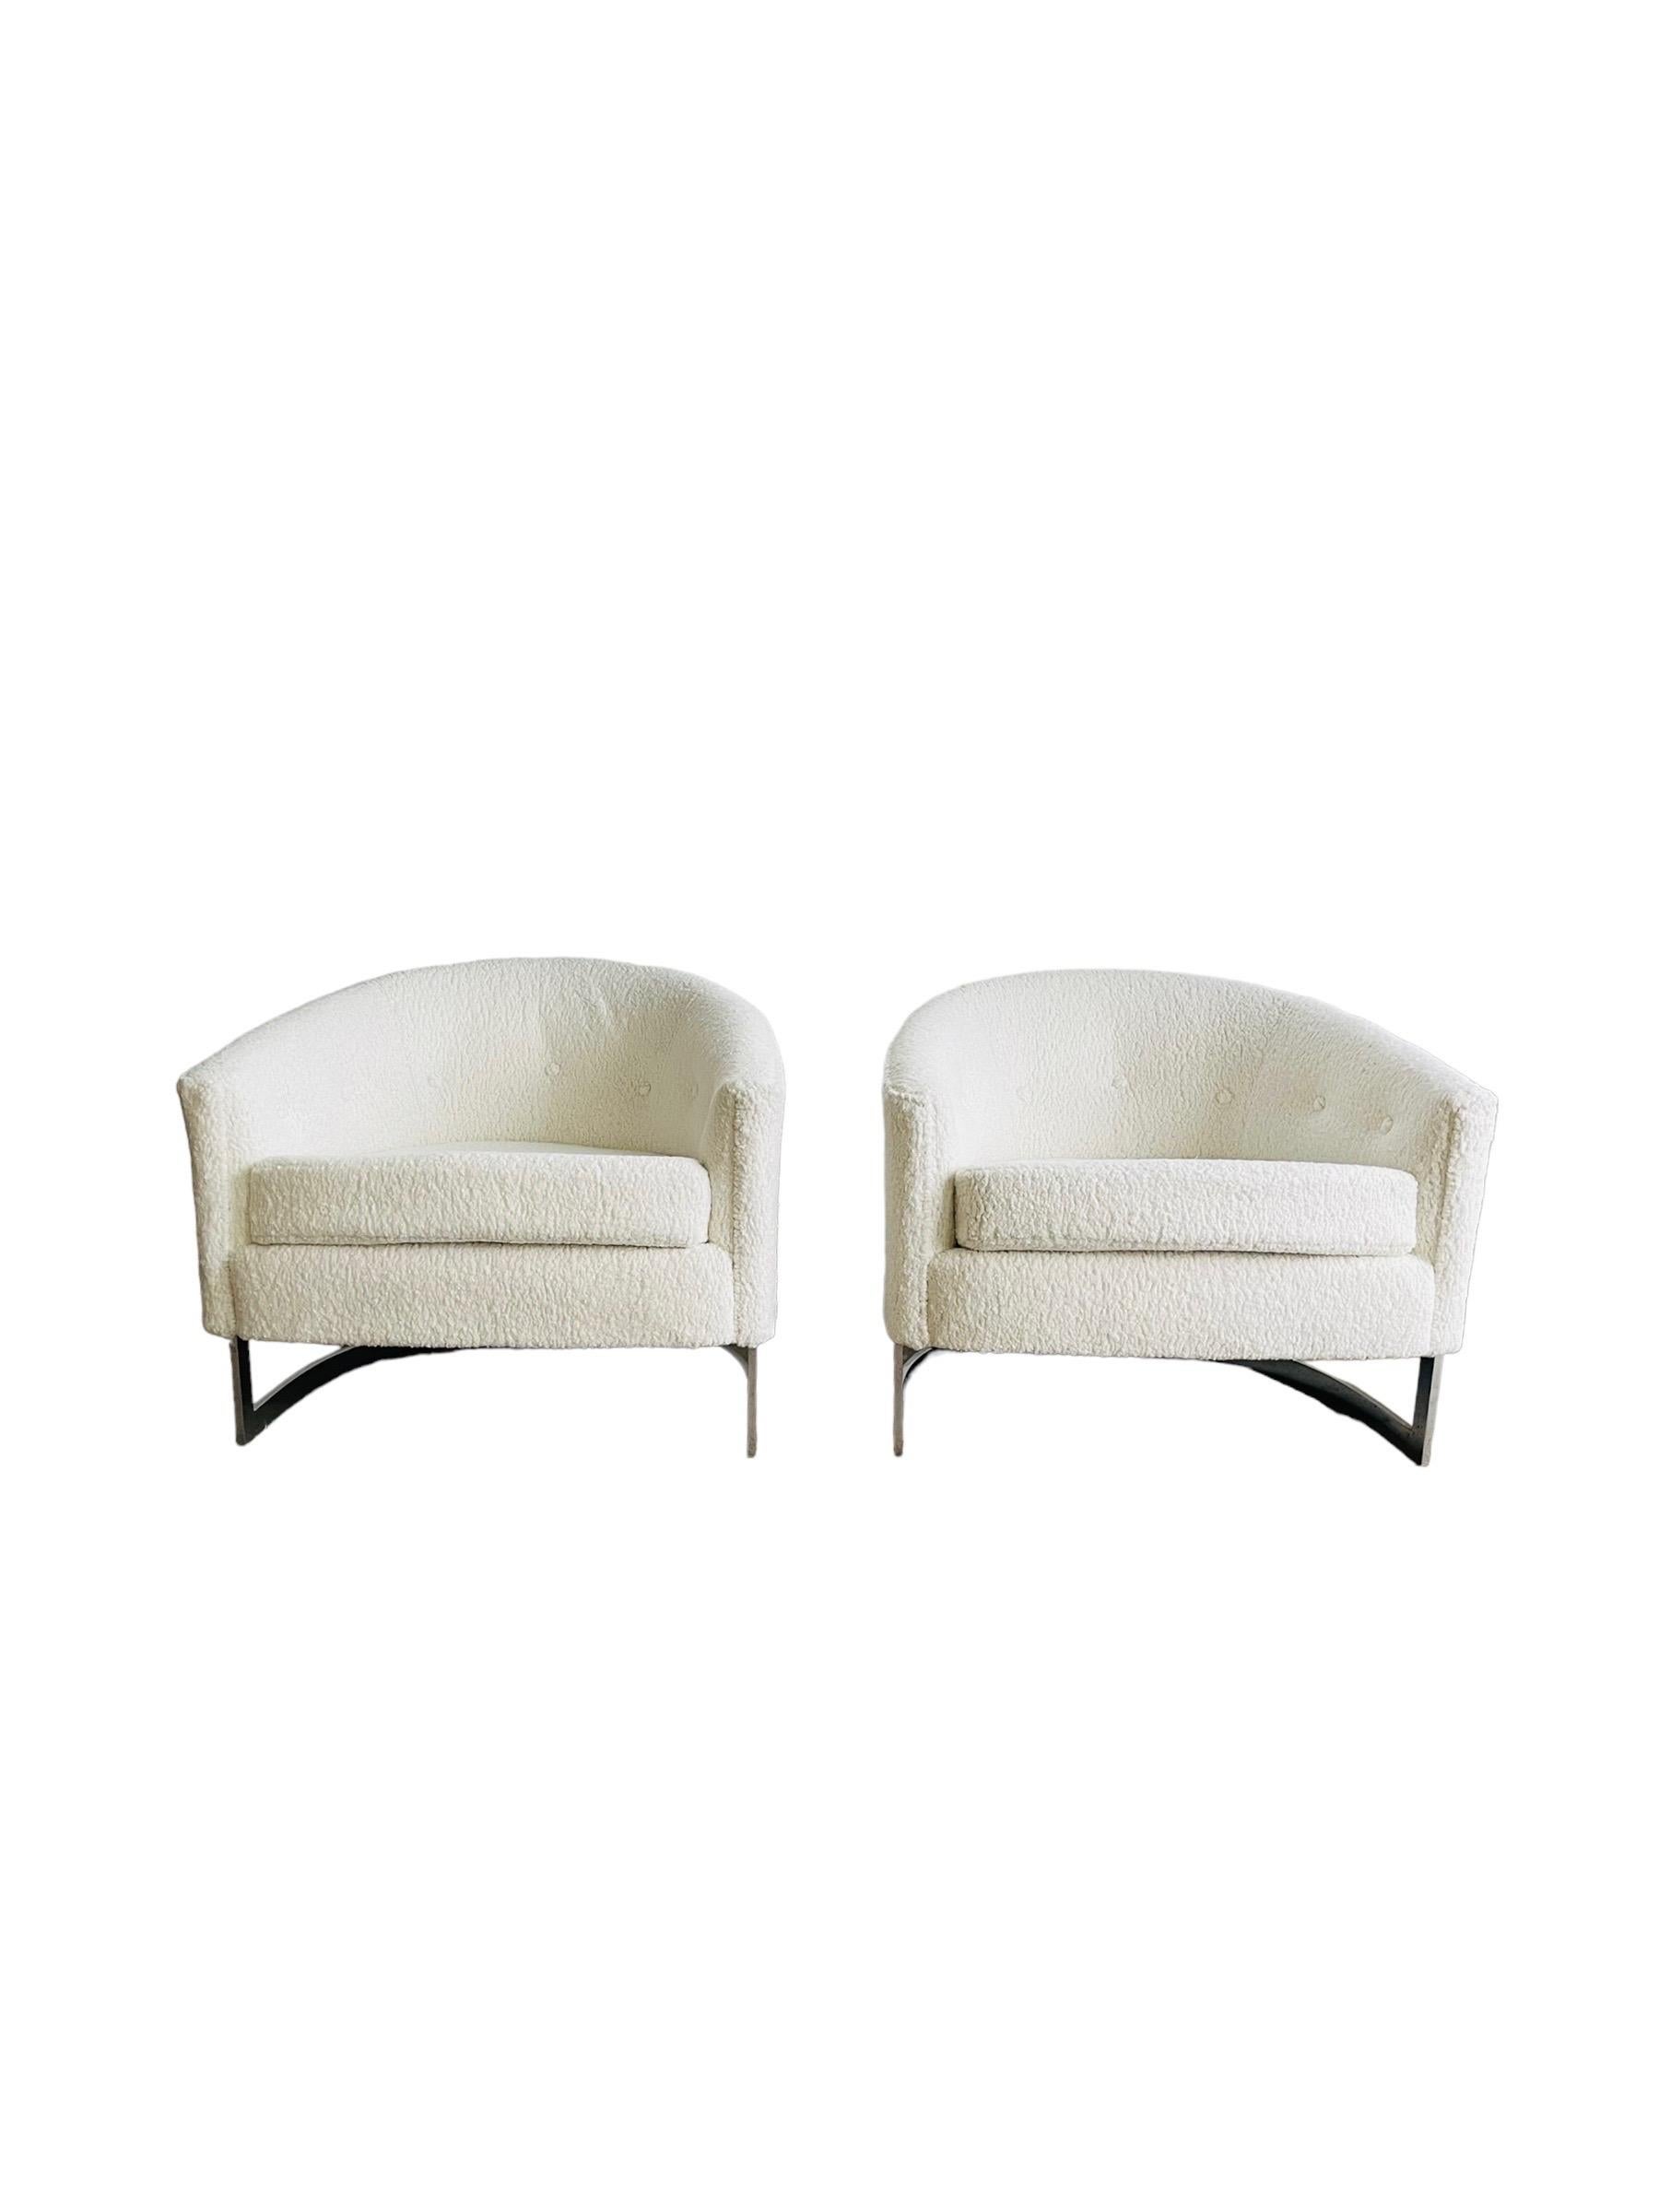 Stunning pair of Mid-Century Modern barrel back lounge chairs designed by Finn Andersen for Selig circa 1968. The chairs are restored and reupholstered in quality Boucle fabric and will make a great addition to any room. 

Finn Anderson was a